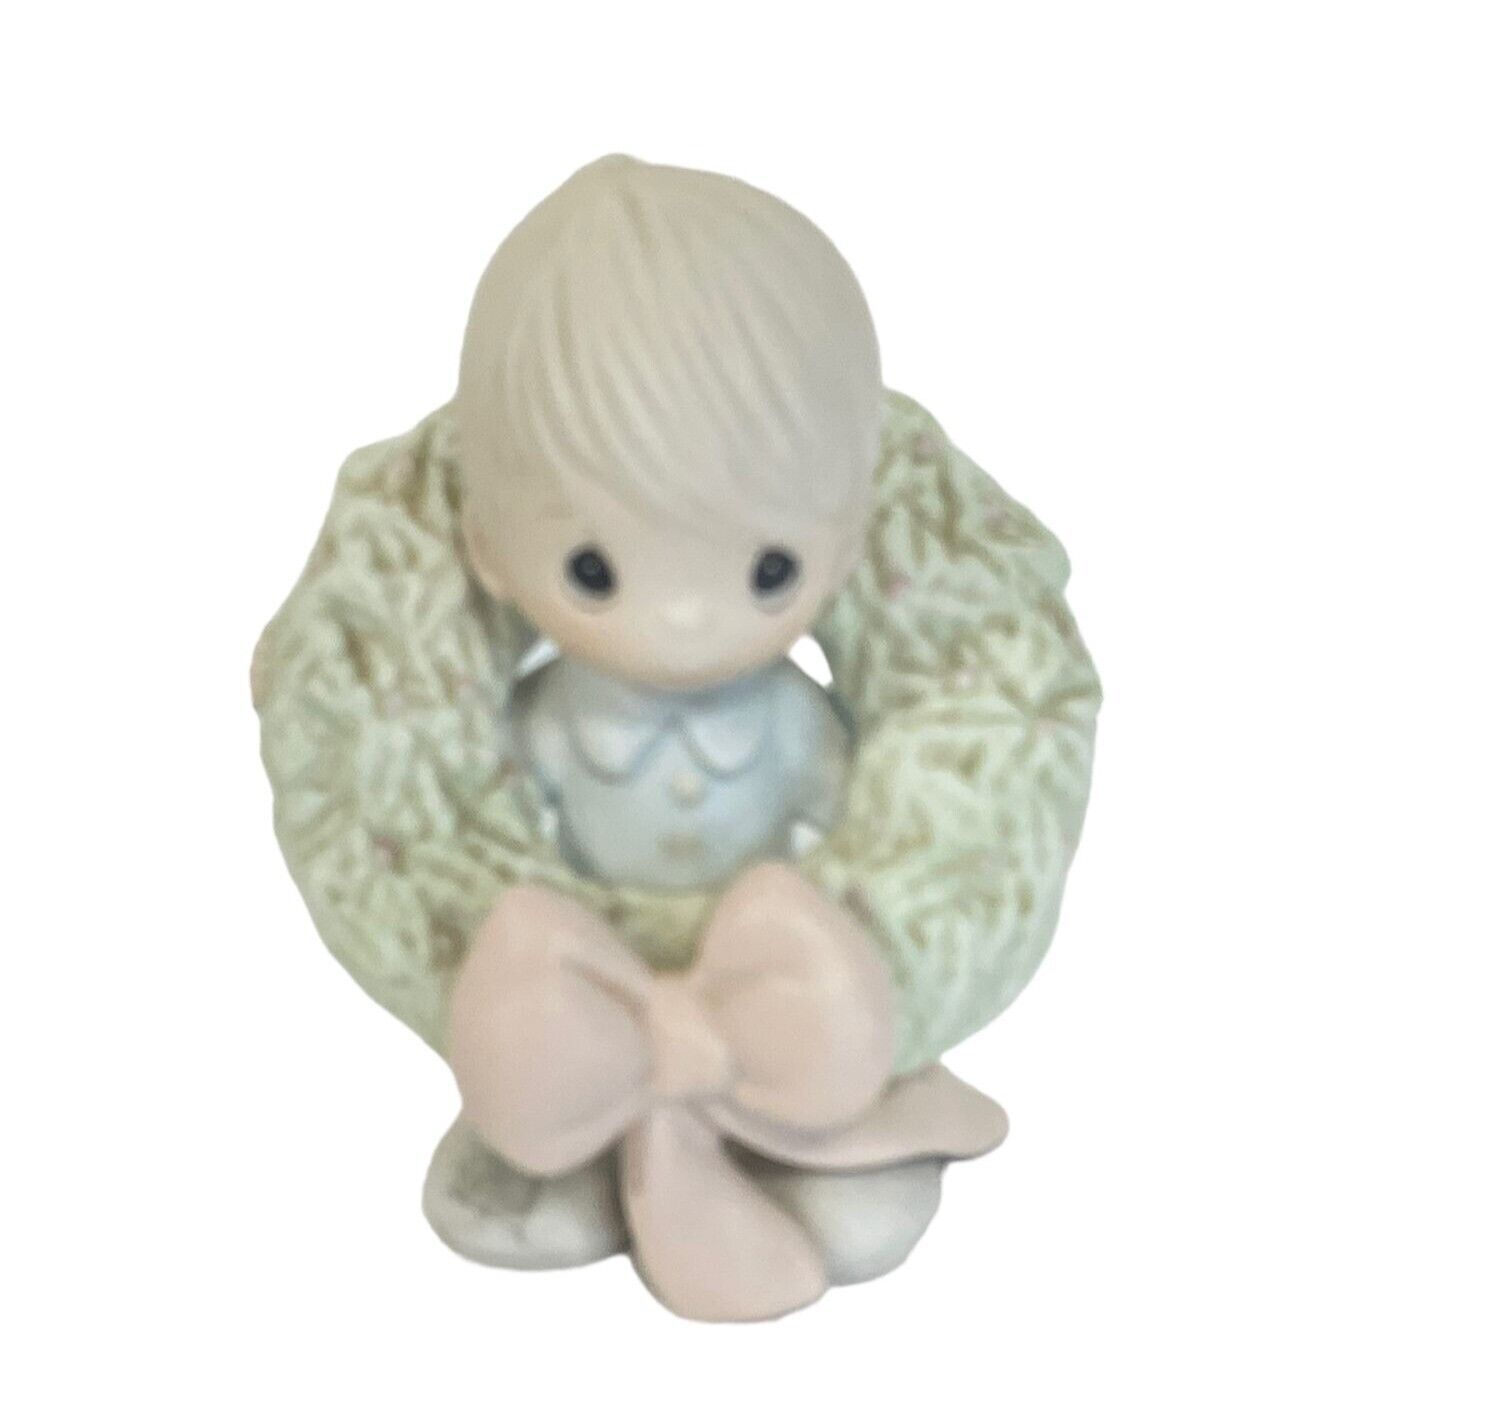 Primary image for Precious Moments 1983 Surrounded with Joy Figurine No. E-0506